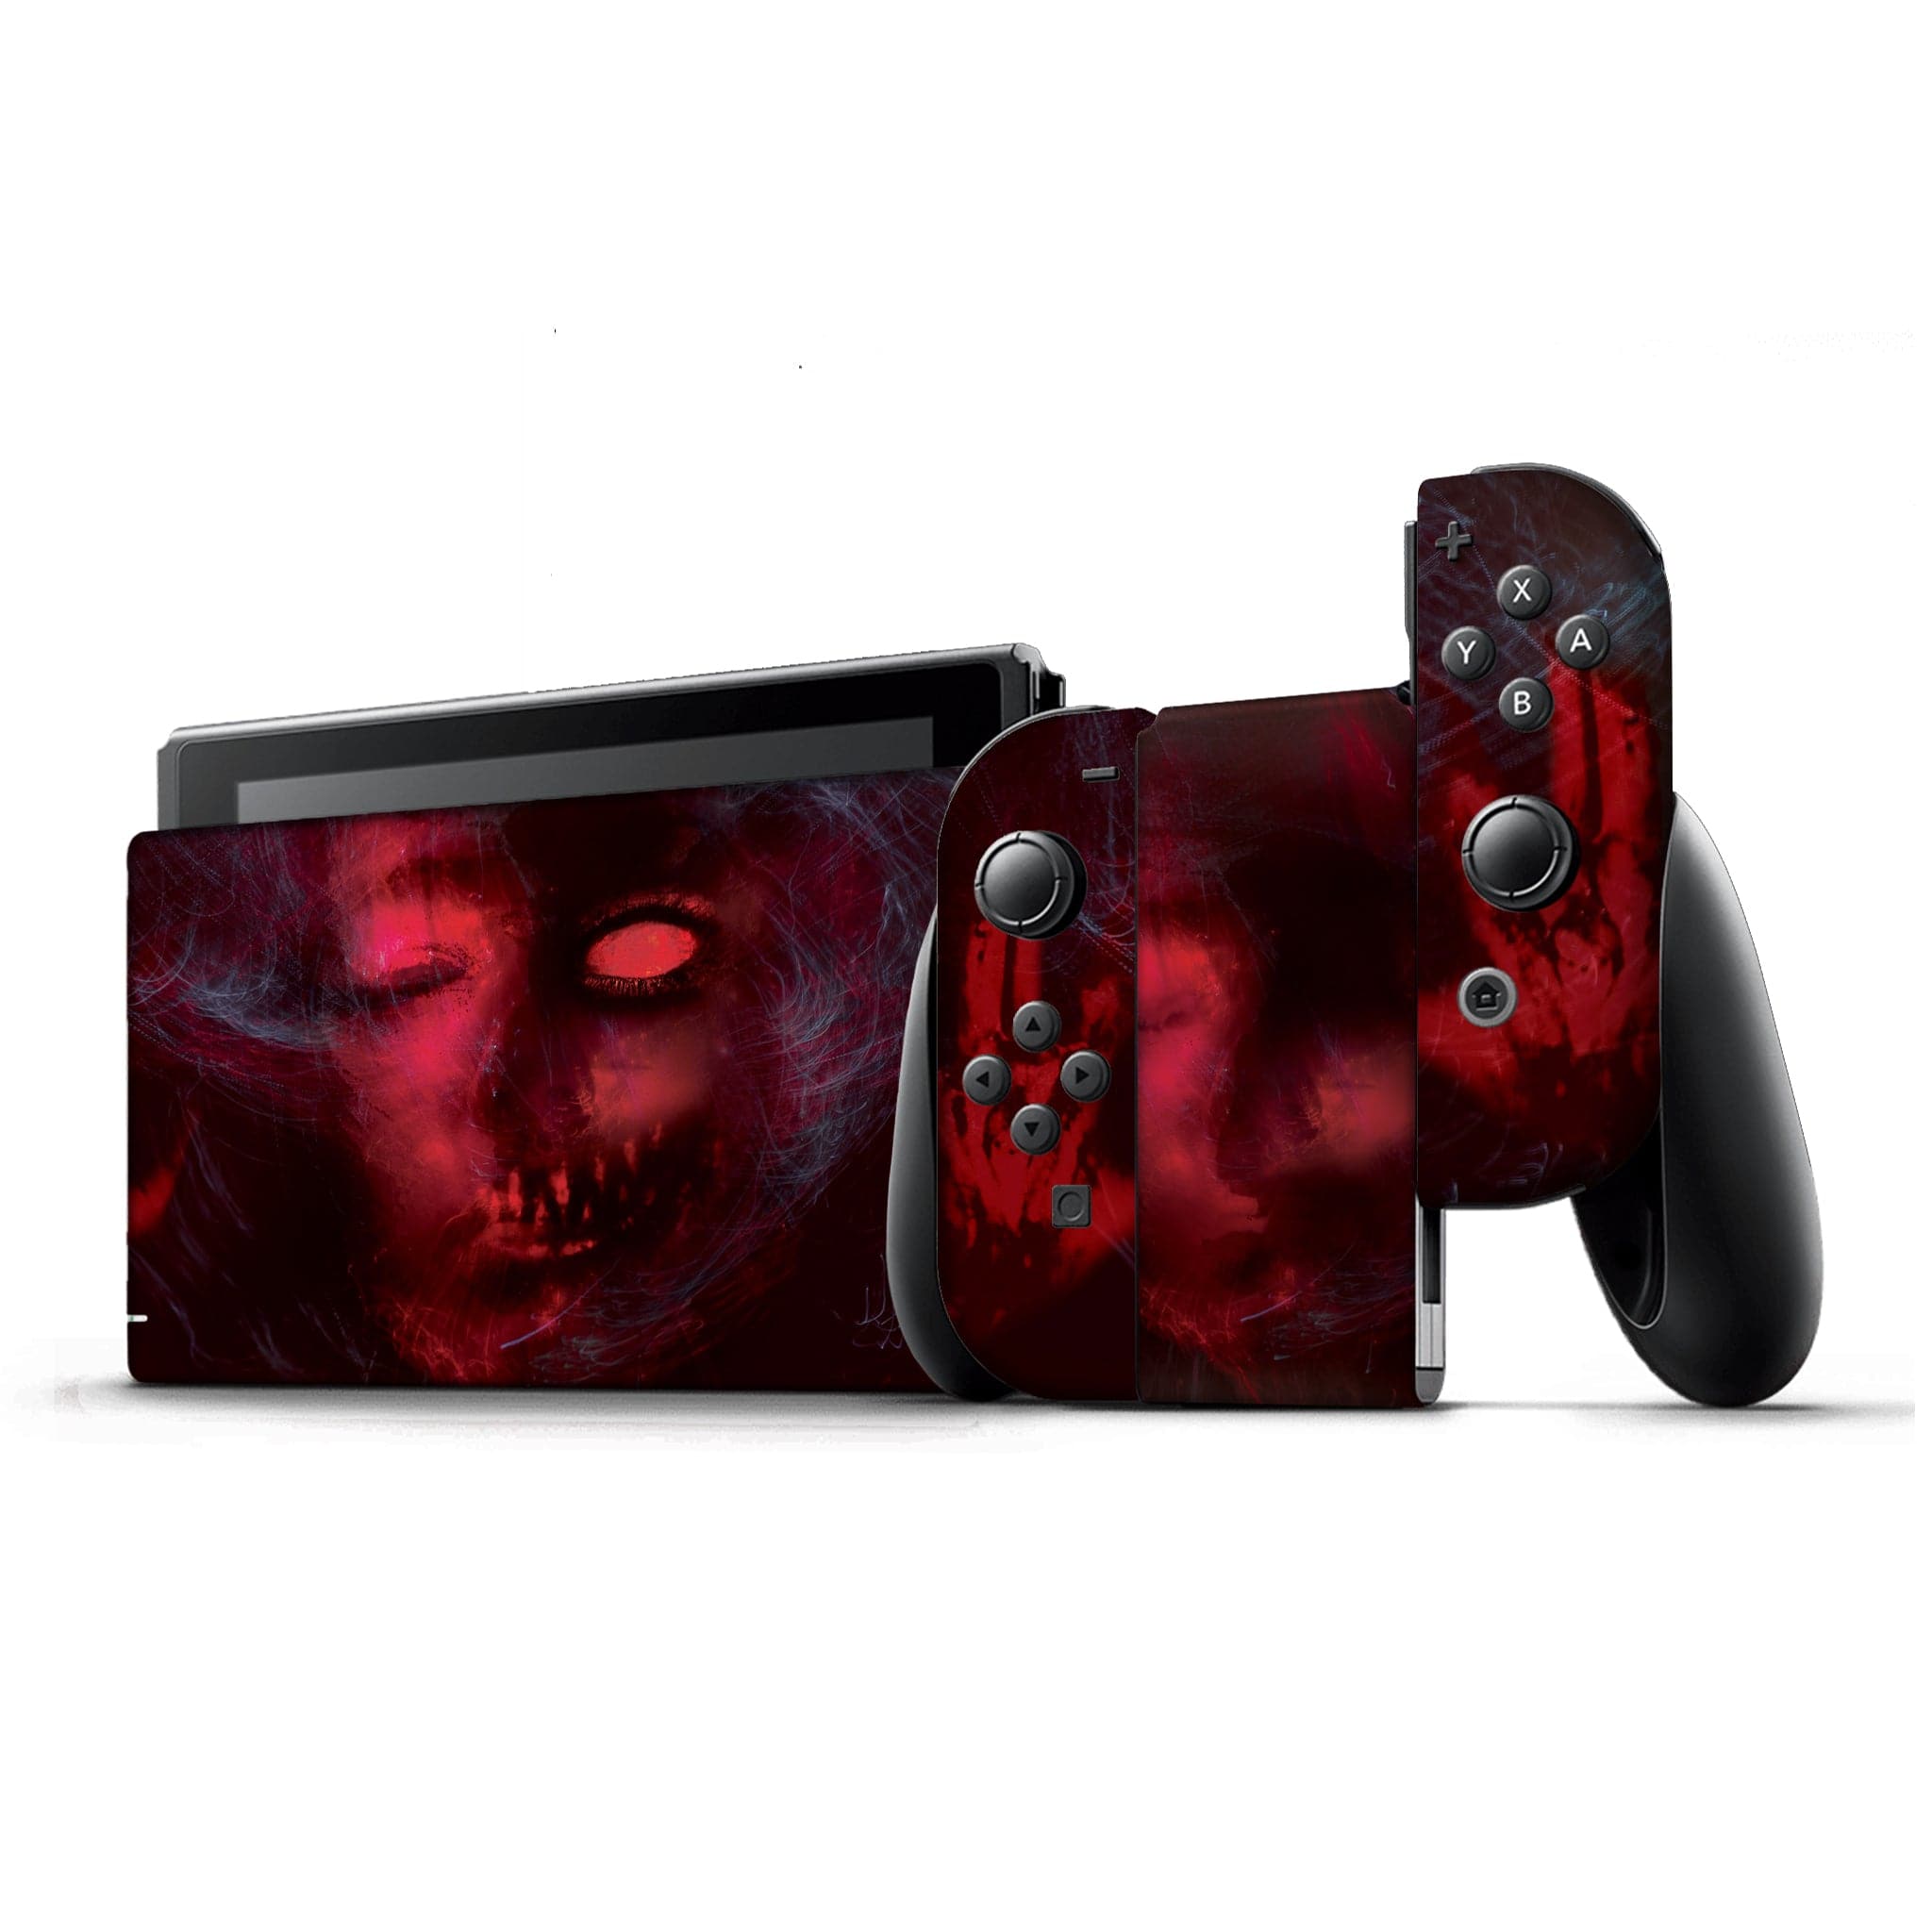 Dawn of the Dead Inspired Nintendo Switch Full Set by Nintendo